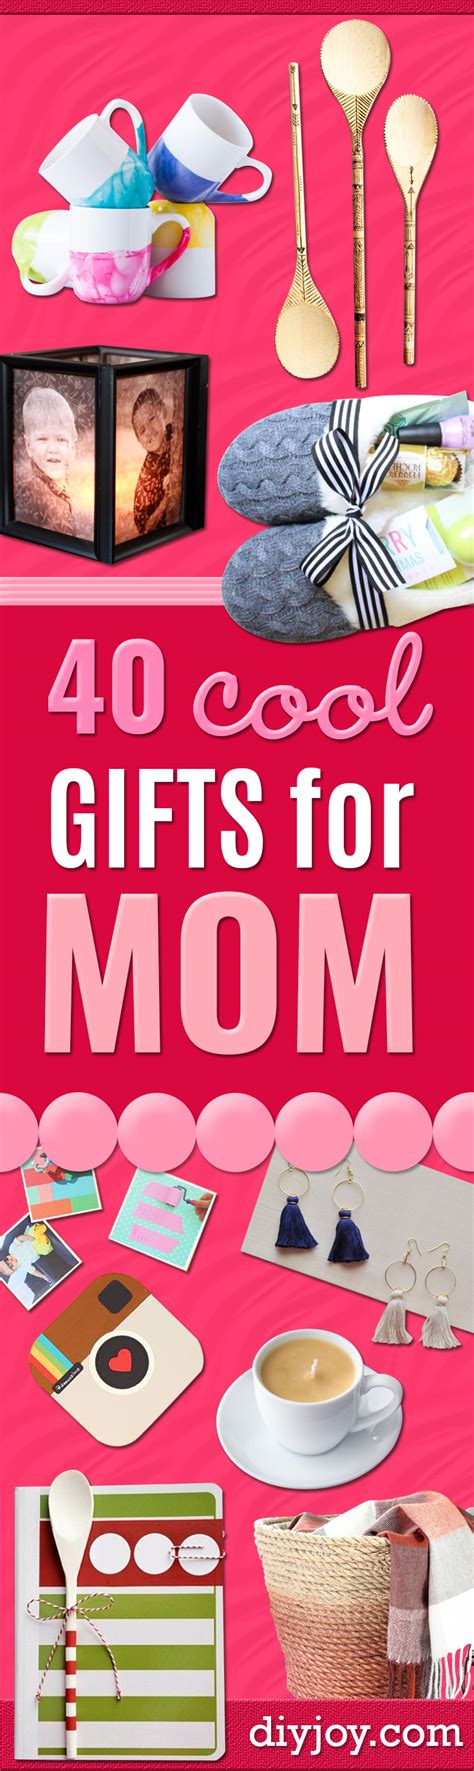 Birthday gifts for mom is really important. 40 Coolest Gifts To Make for Mom